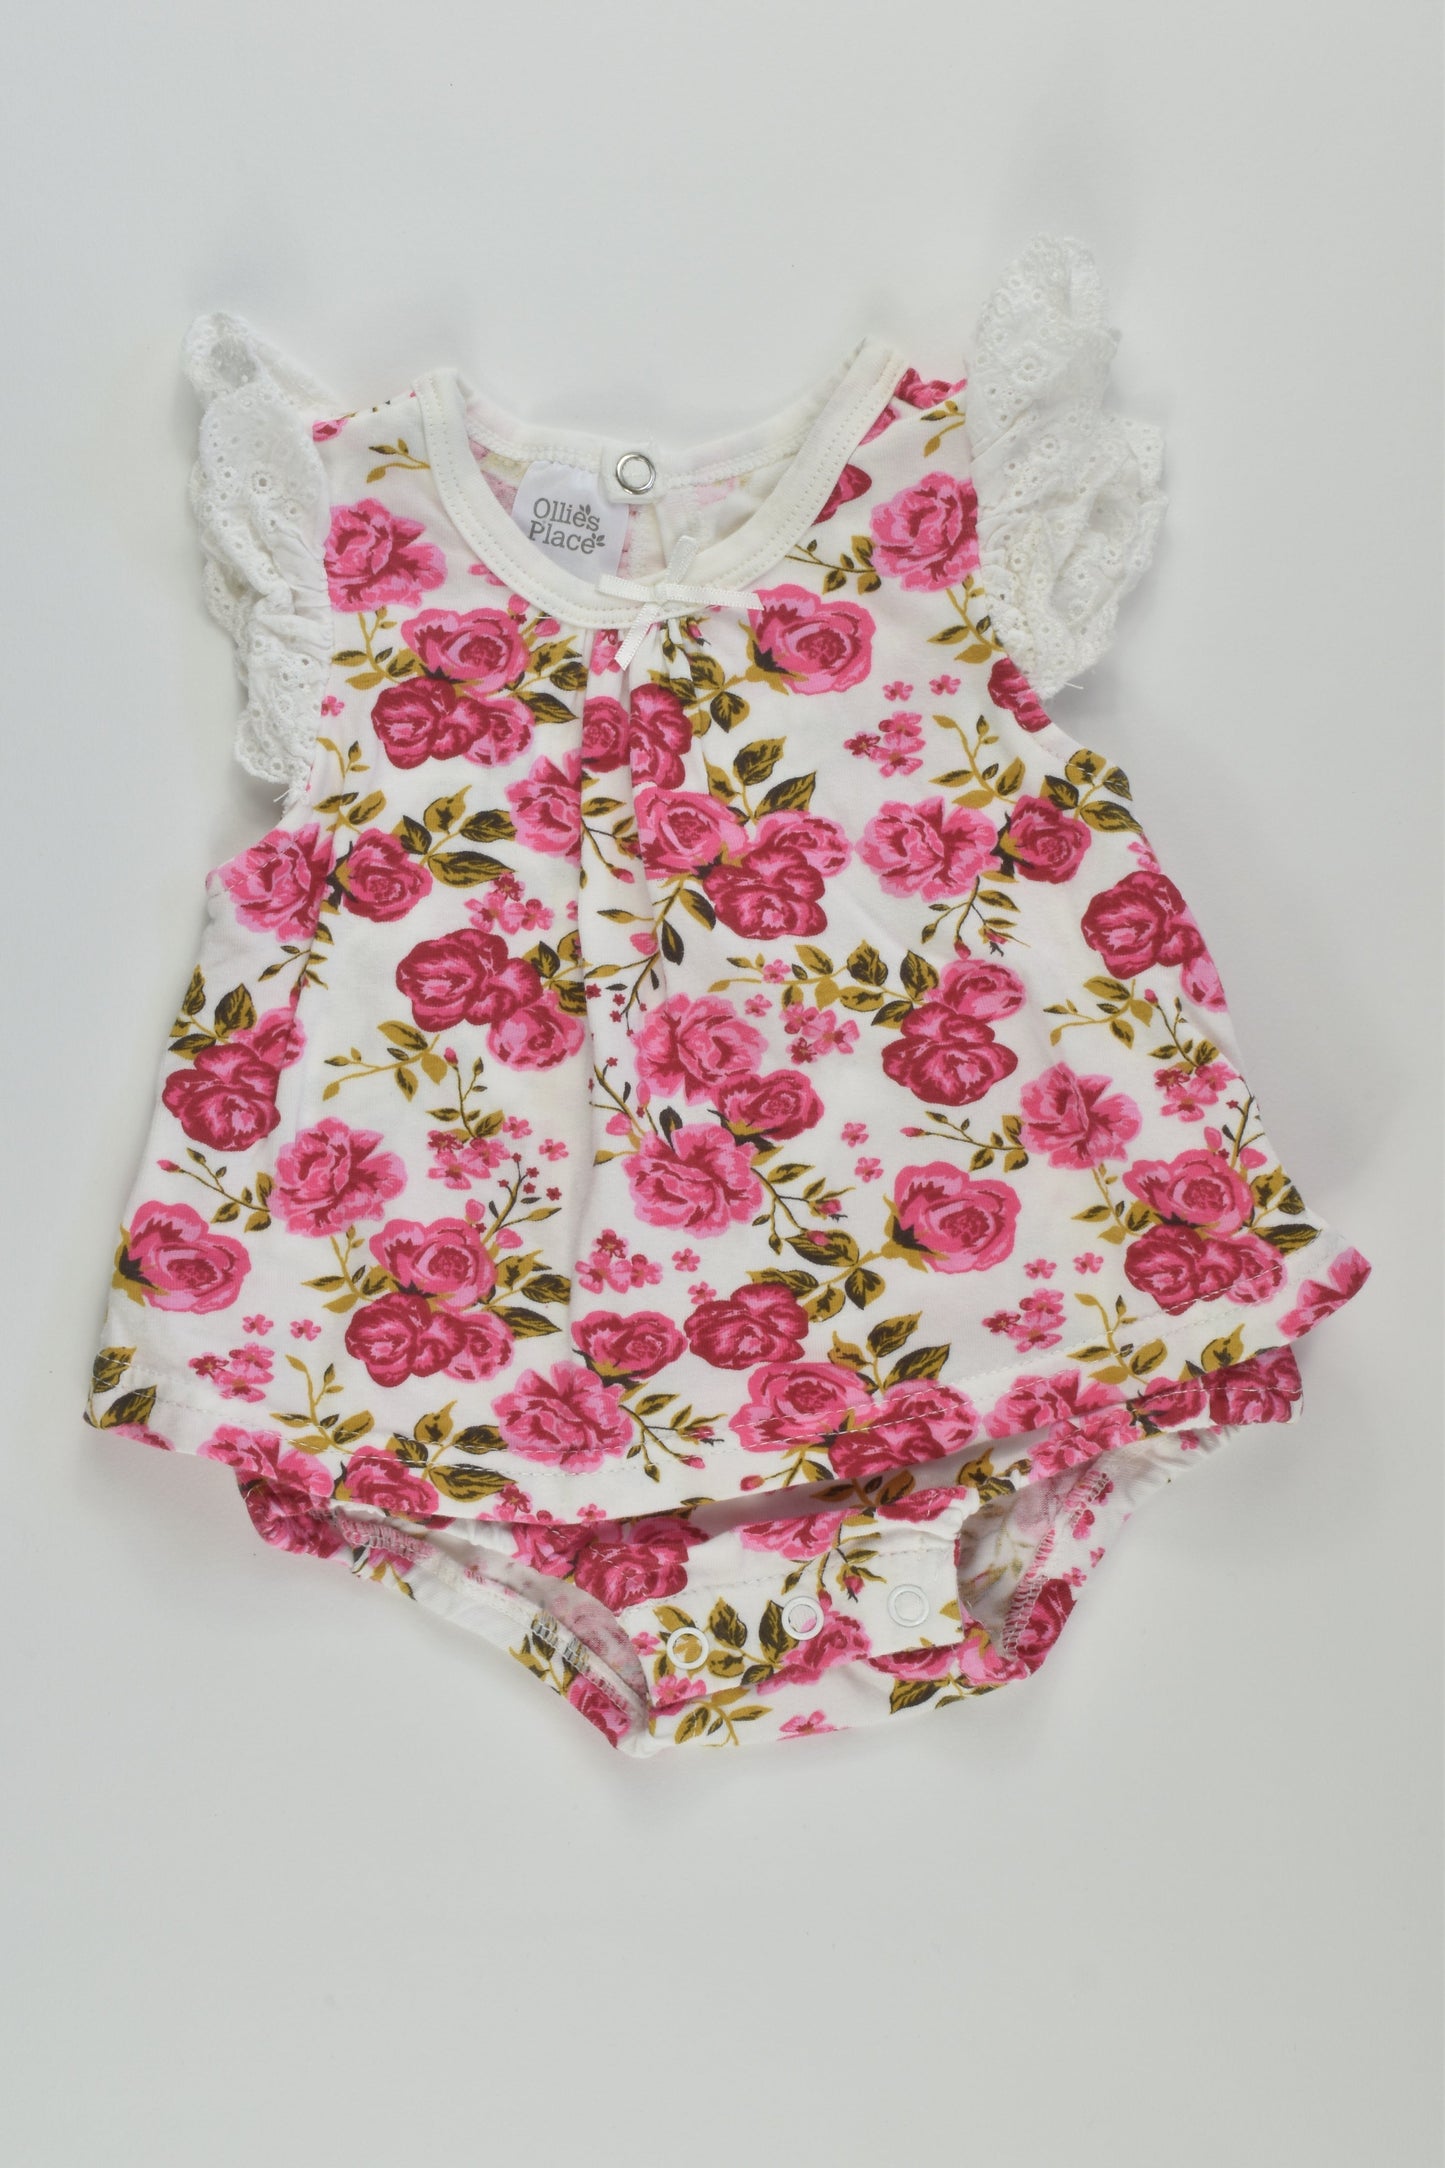 Ollie's Place Size 0000 Romper